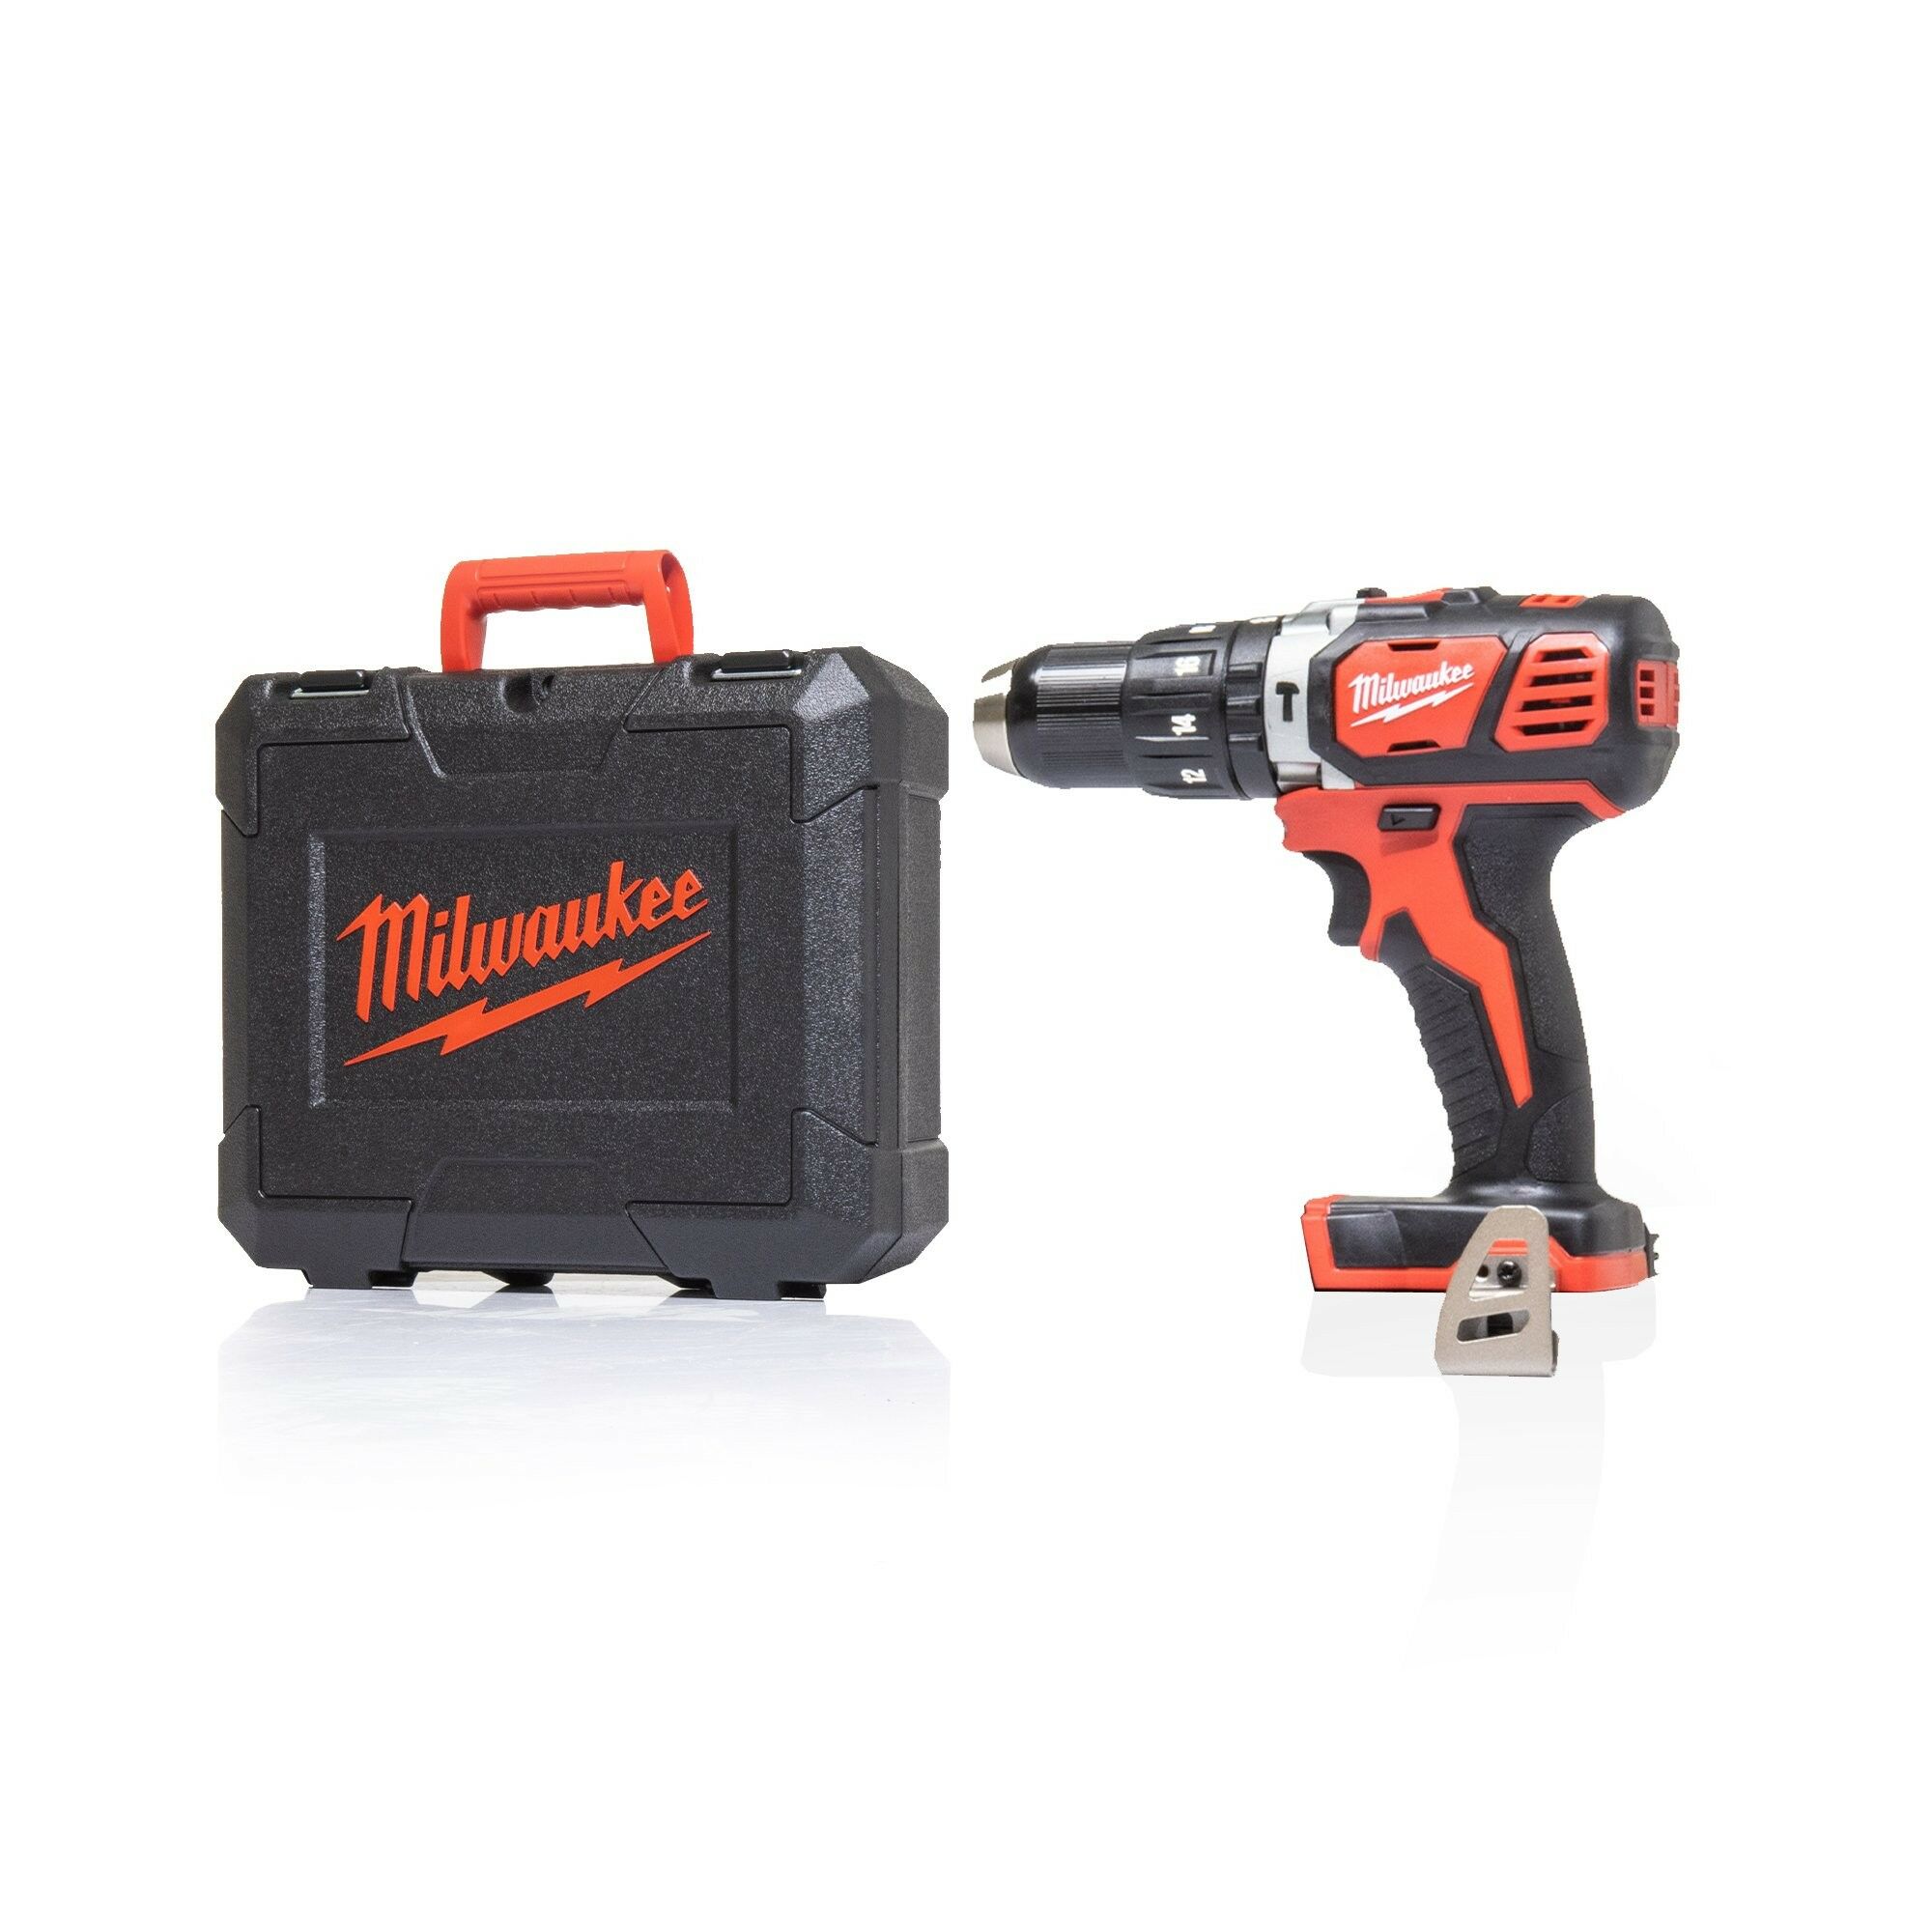 Milwaukee M18BPD-0X M18 18V Combi Drill (Body Only) with Free Case